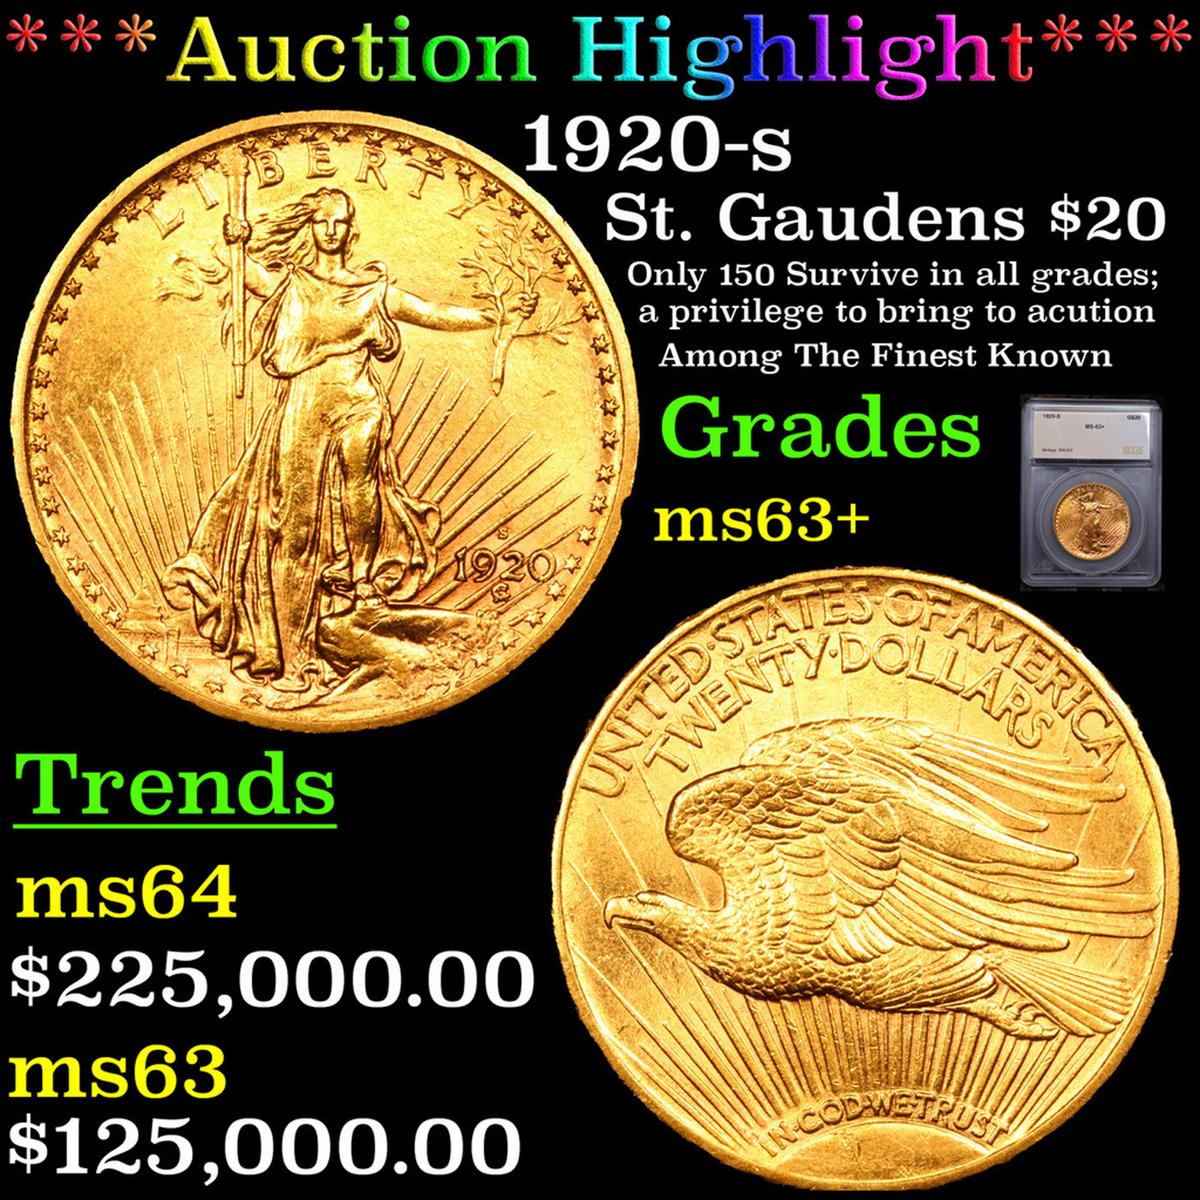 ***Auction Highlight*** 1920-s Gold St. Gaudens Double Eagle $20 Graded ms63+ BY SEGS (fc)